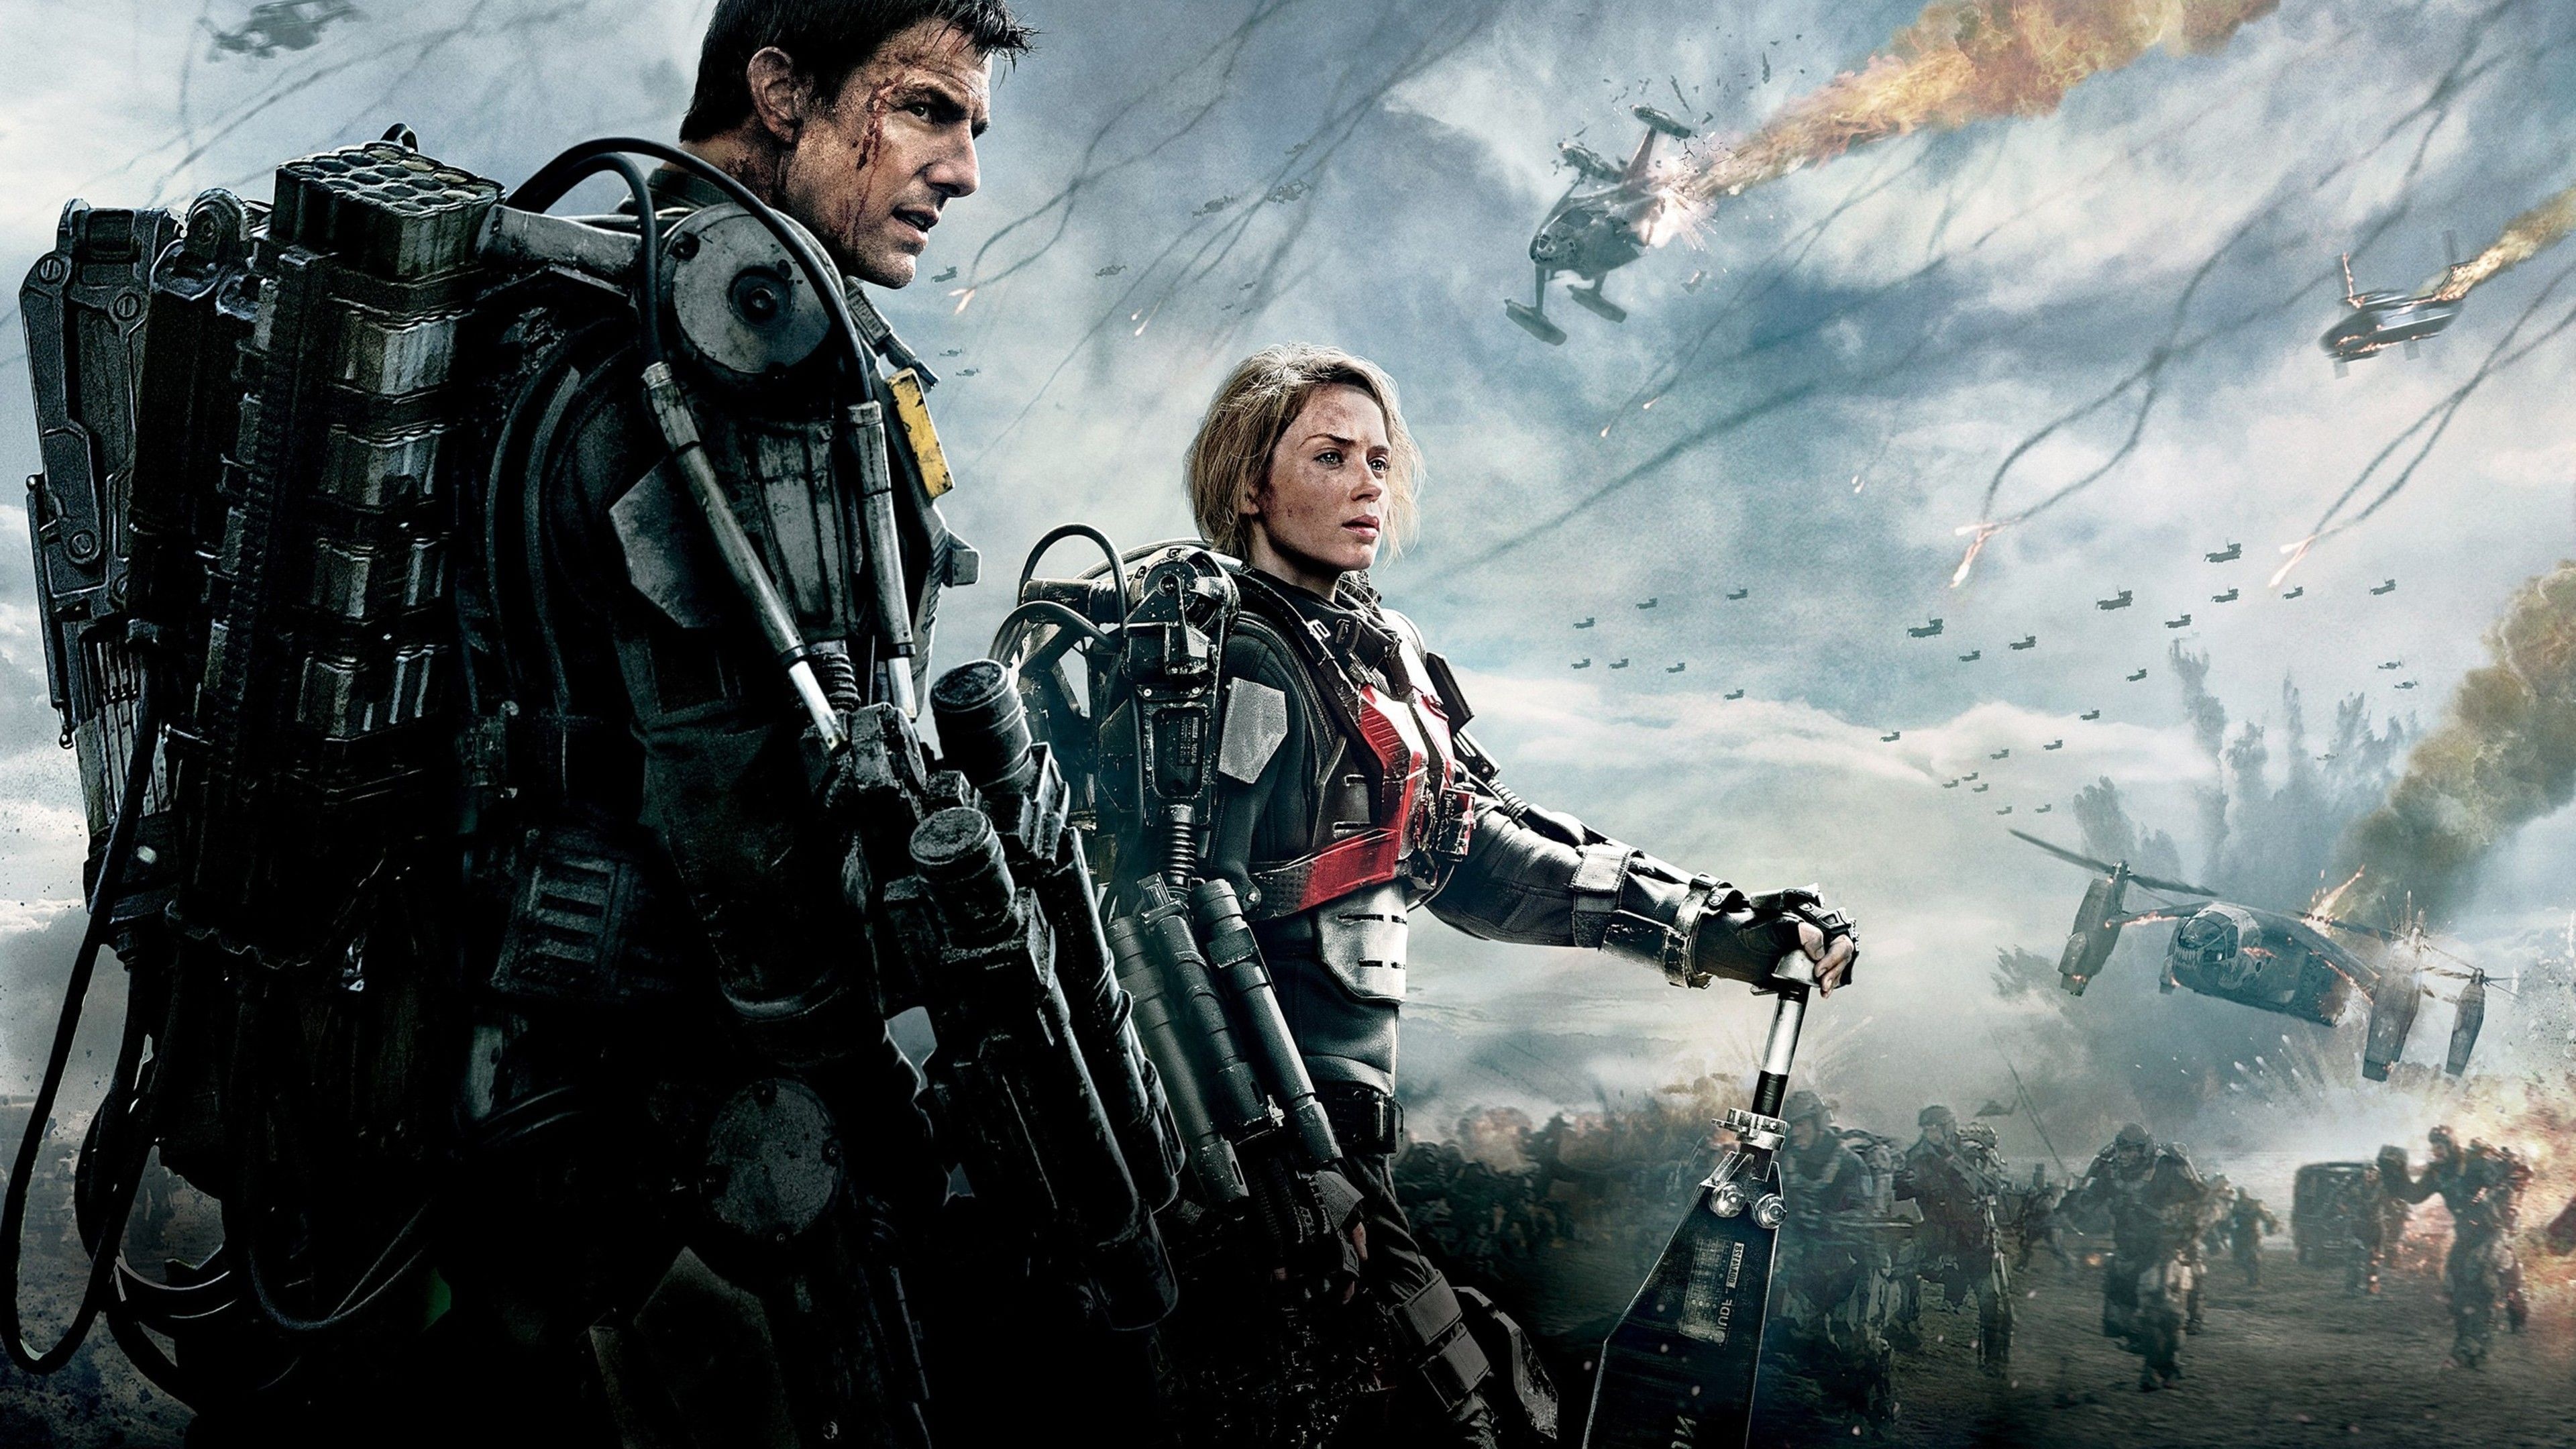 Edge of Tomorrow: A 2014 American science fiction action film starring Tom Cruise and Emily Blunt. 3840x2160 4K Background.